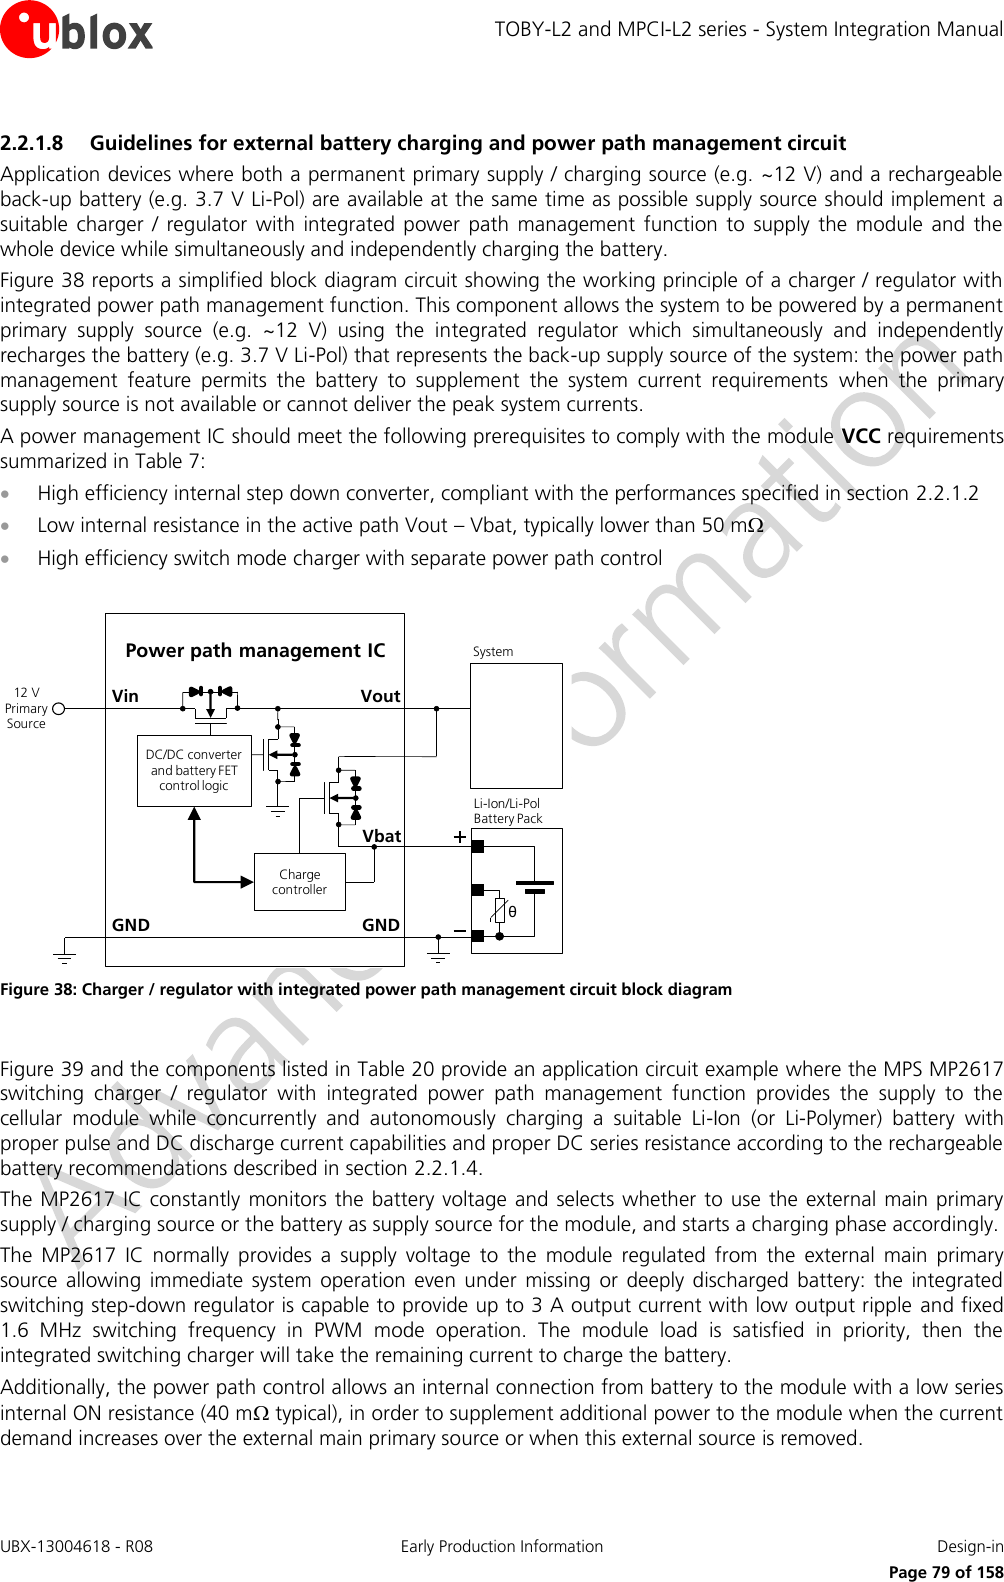 TOBY-L2 and MPCI-L2 series - System Integration Manual UBX-13004618 - R08  Early Production Information  Design-in     Page 79 of 158 2.2.1.8 Guidelines for external battery charging and power path management circuit Application devices where both a permanent primary supply / charging source (e.g. ~12 V) and a rechargeable back-up battery (e.g. 3.7 V Li-Pol) are available at the same time as possible supply source should implement a suitable  charger  /  regulator  with  integrated  power  path  management  function  to  supply  the  module  and  the whole device while simultaneously and independently charging the battery. Figure 38 reports a simplified block diagram circuit showing the working principle of a charger / regulator with integrated power path management function. This component allows the system to be powered by a permanent primary  supply  source  (e.g.  ~12  V)  using  the  integrated  regulator  which  simultaneously  and  independently recharges the battery (e.g. 3.7 V Li-Pol) that represents the back-up supply source of the system: the power path management  feature  permits  the  battery  to  supplement  the  system  current  requirements  when  the  primary supply source is not available or cannot deliver the peak system currents. A power management IC should meet the following prerequisites to comply with the module VCC requirements summarized in Table 7:  High efficiency internal step down converter, compliant with the performances specified in section 2.2.1.2  Low internal resistance in the active path Vout – Vbat, typically lower than 50 m  High efficiency switch mode charger with separate power path control  GNDPower path management ICVoutVinθLi-Ion/Li-Pol Battery PackGNDSystem12 V Primary SourceCharge controllerDC/DC converter and battery FET control logicVbat Figure 38: Charger / regulator with integrated power path management circuit block diagram  Figure 39 and the components listed in Table 20 provide an application circuit example where the MPS MP2617 switching  charger  /  regulator  with  integrated  power  path  management  function  provides  the  supply  to  the cellular  module  while  concurrently  and  autonomously  charging  a  suitable  Li-Ion  (or  Li-Polymer)  battery  with proper pulse and DC discharge current capabilities and proper DC series resistance according to the rechargeable battery recommendations described in section 2.2.1.4. The MP2617 IC  constantly  monitors the battery  voltage and selects whether to use the external main  primary supply / charging source or the battery as supply source for the module, and starts a charging phase accordingly.  The  MP2617  IC  normally  provides  a  supply  voltage  to  the  module  regulated  from  the  external  main  primary source  allowing  immediate  system  operation  even  under  missing  or  deeply  discharged  battery:  the  integrated switching step-down regulator is capable to provide up to 3 A output current with low output ripple and fixed 1.6  MHz  switching  frequency  in  PWM  mode  operation.  The  module  load  is  satisfied  in  priority,  then  the integrated switching charger will take the remaining current to charge the battery. Additionally, the power path control allows an internal connection from battery to the module with a low series internal ON resistance (40 m typical), in order to supplement additional power to the module when the current demand increases over the external main primary source or when this external source is removed.  